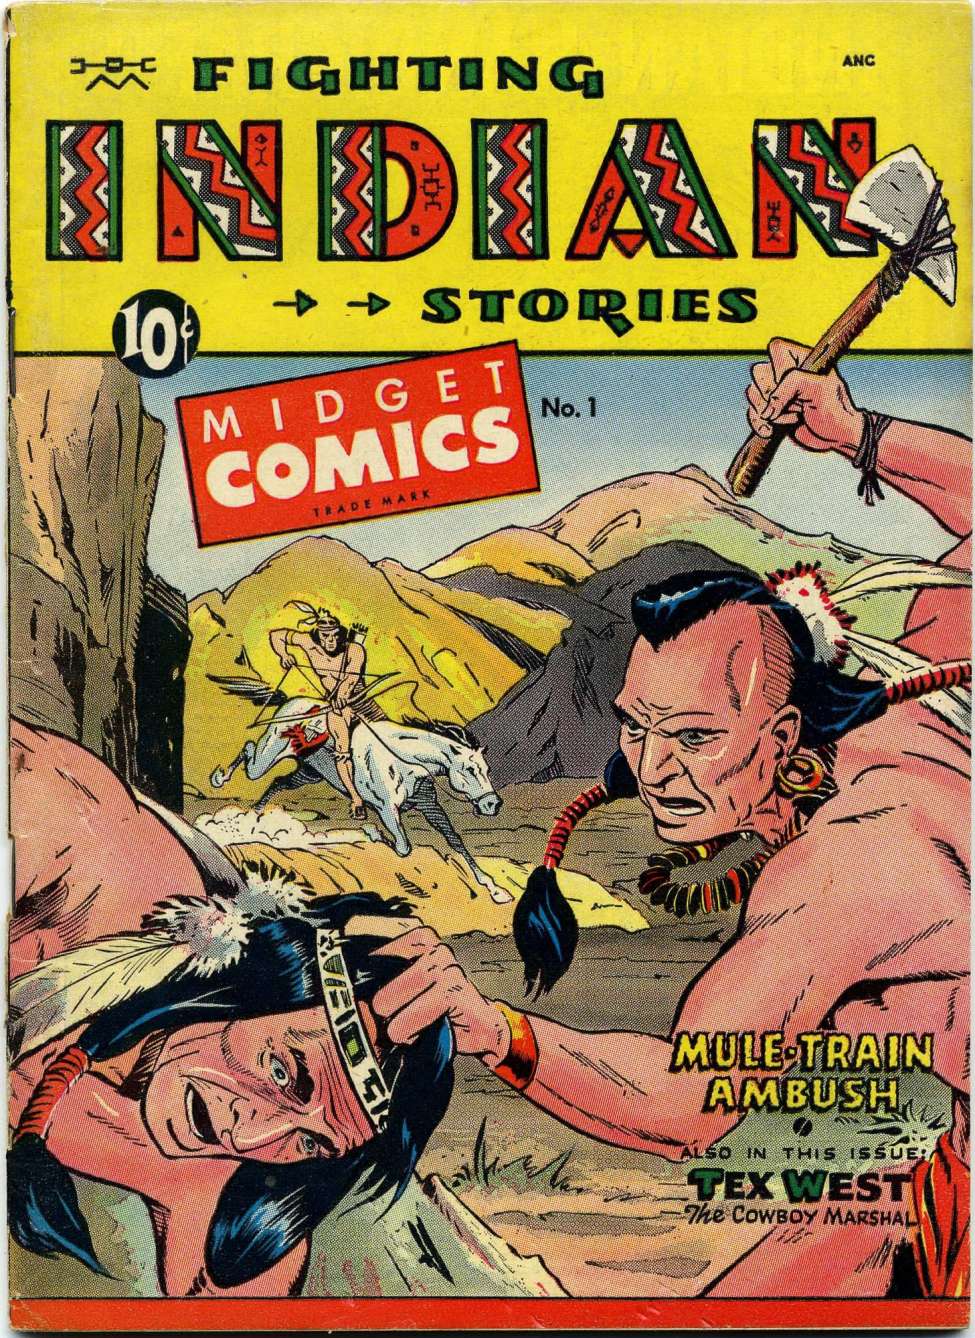 Comic Book Cover For Midget Comics 1 - Fighting Indian Stories